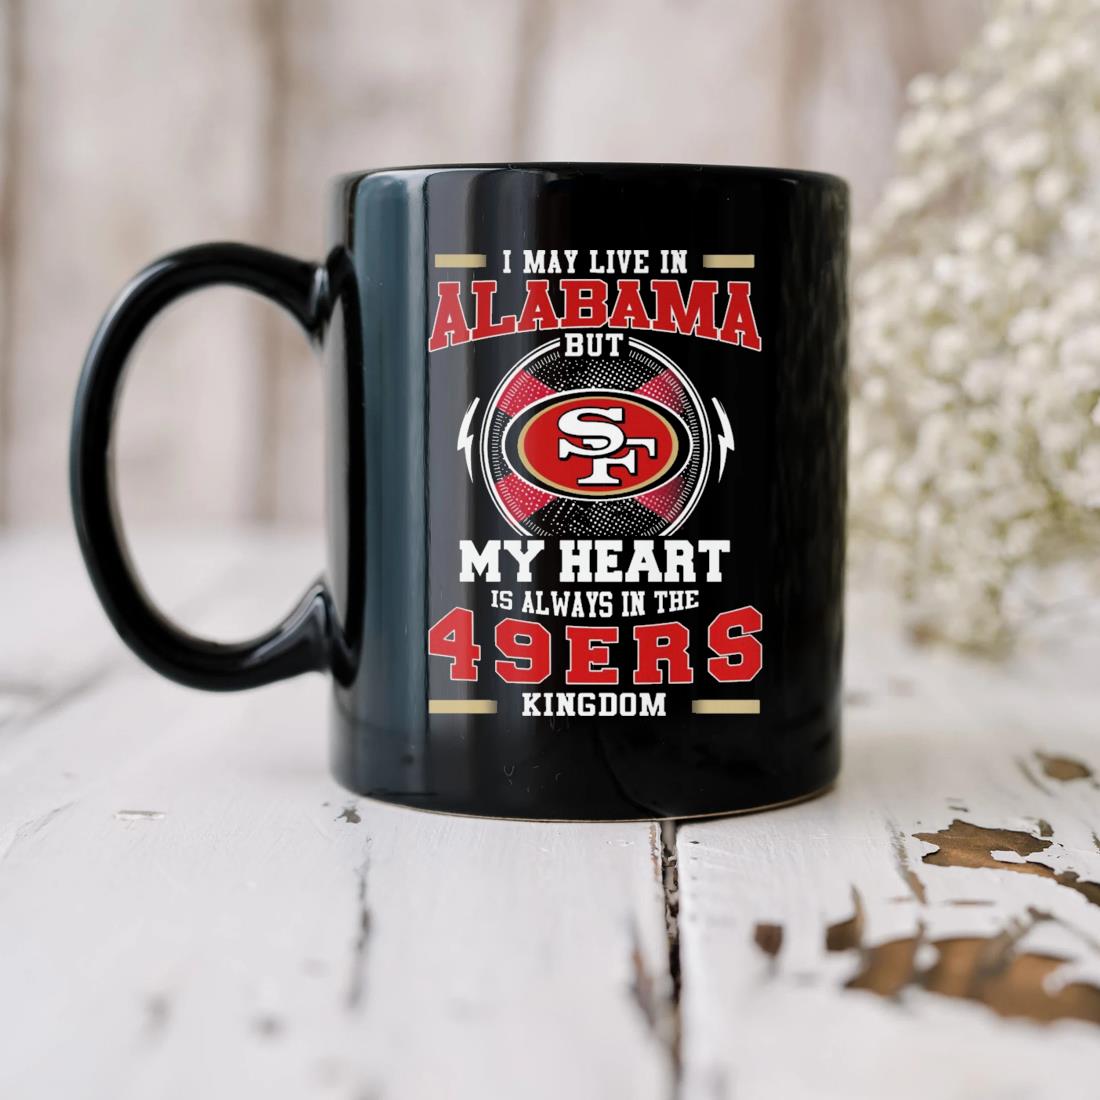 I May Live In Alabama But My Heart Is Always In The 49ers Kingdom Mug